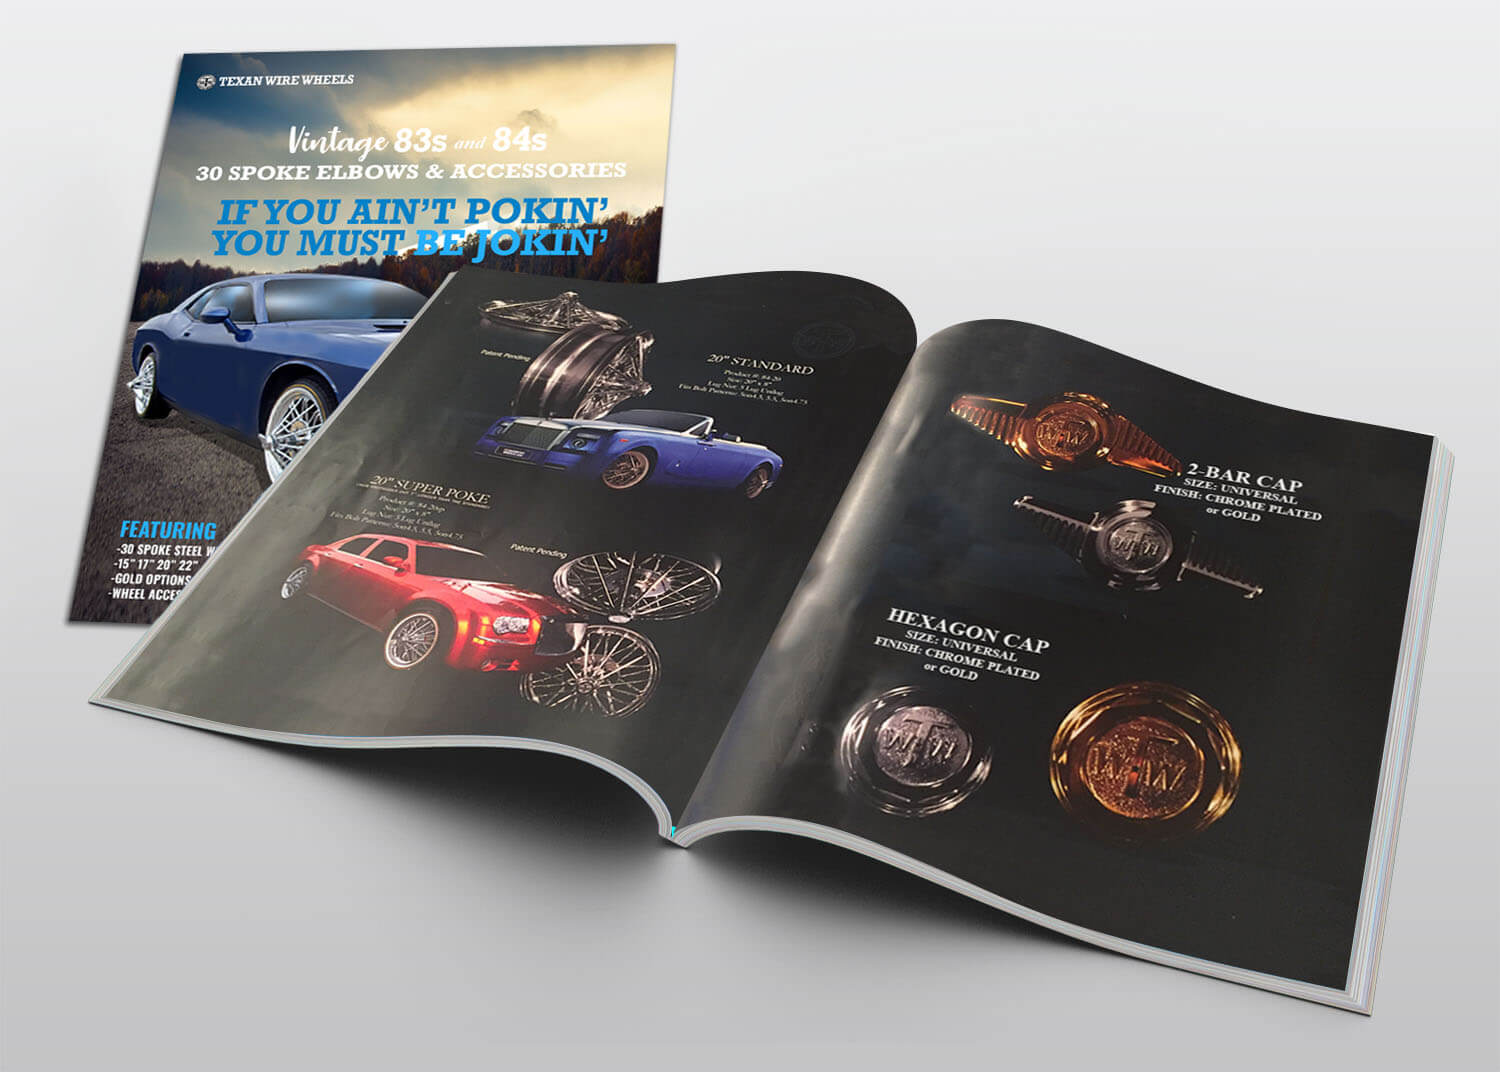 Texan Wire Wheels Product Catalog